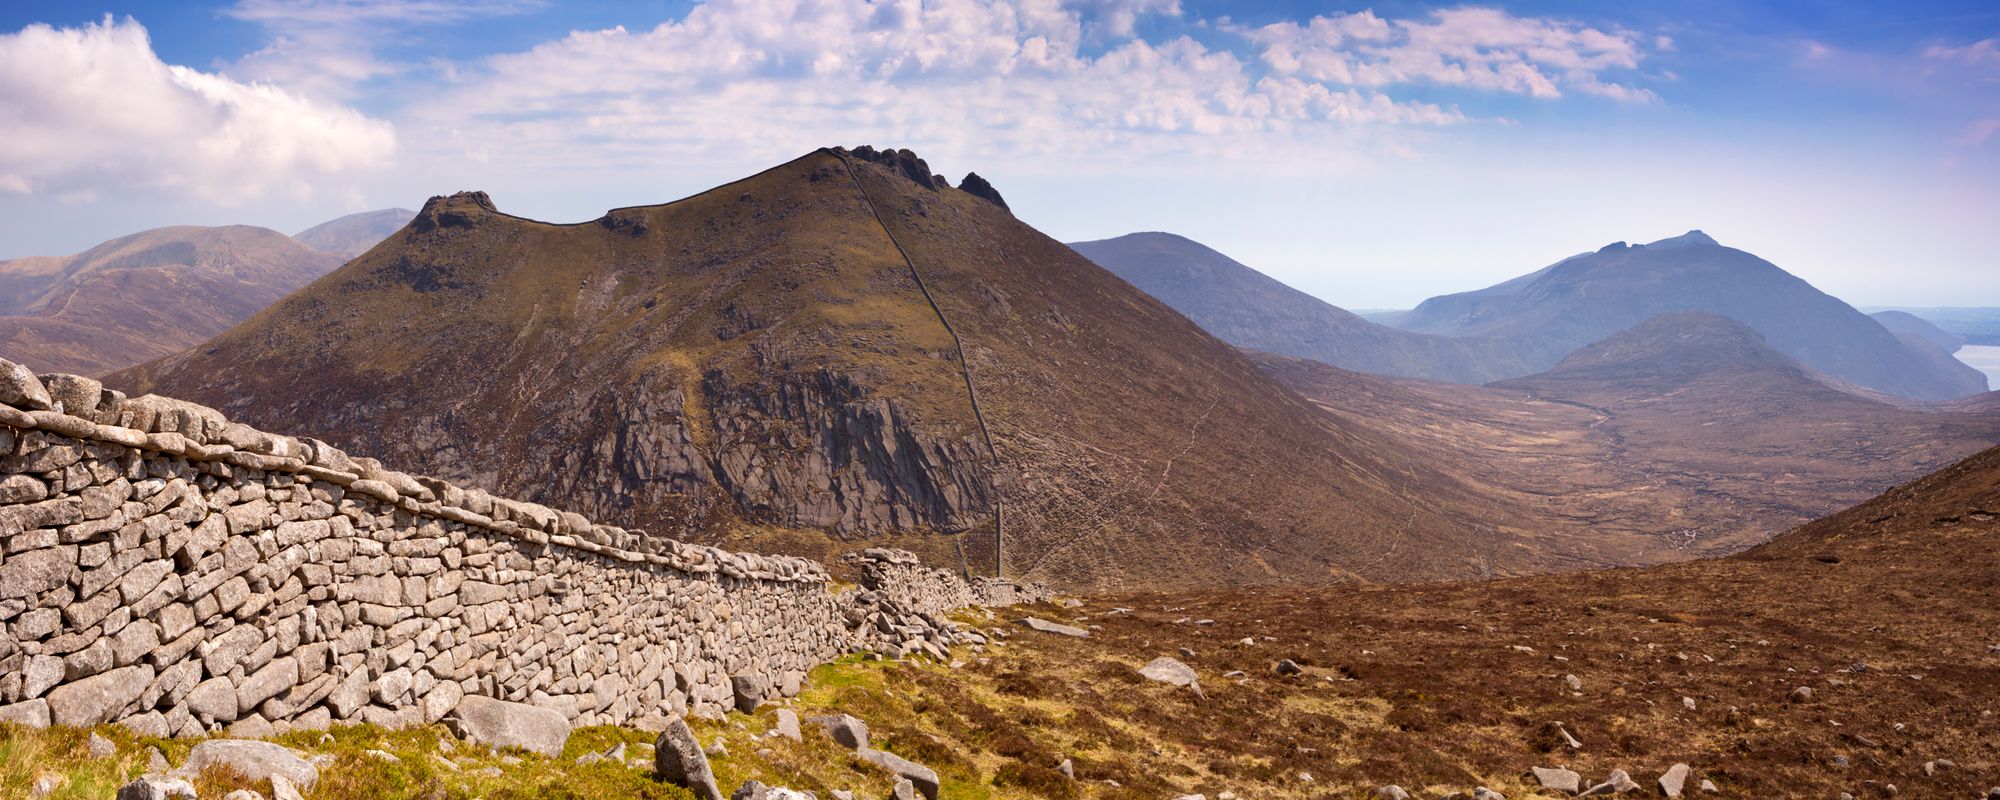 The famous Mourne Wall of the Mourne Mountains in Northern Ireland. Photo: Getty